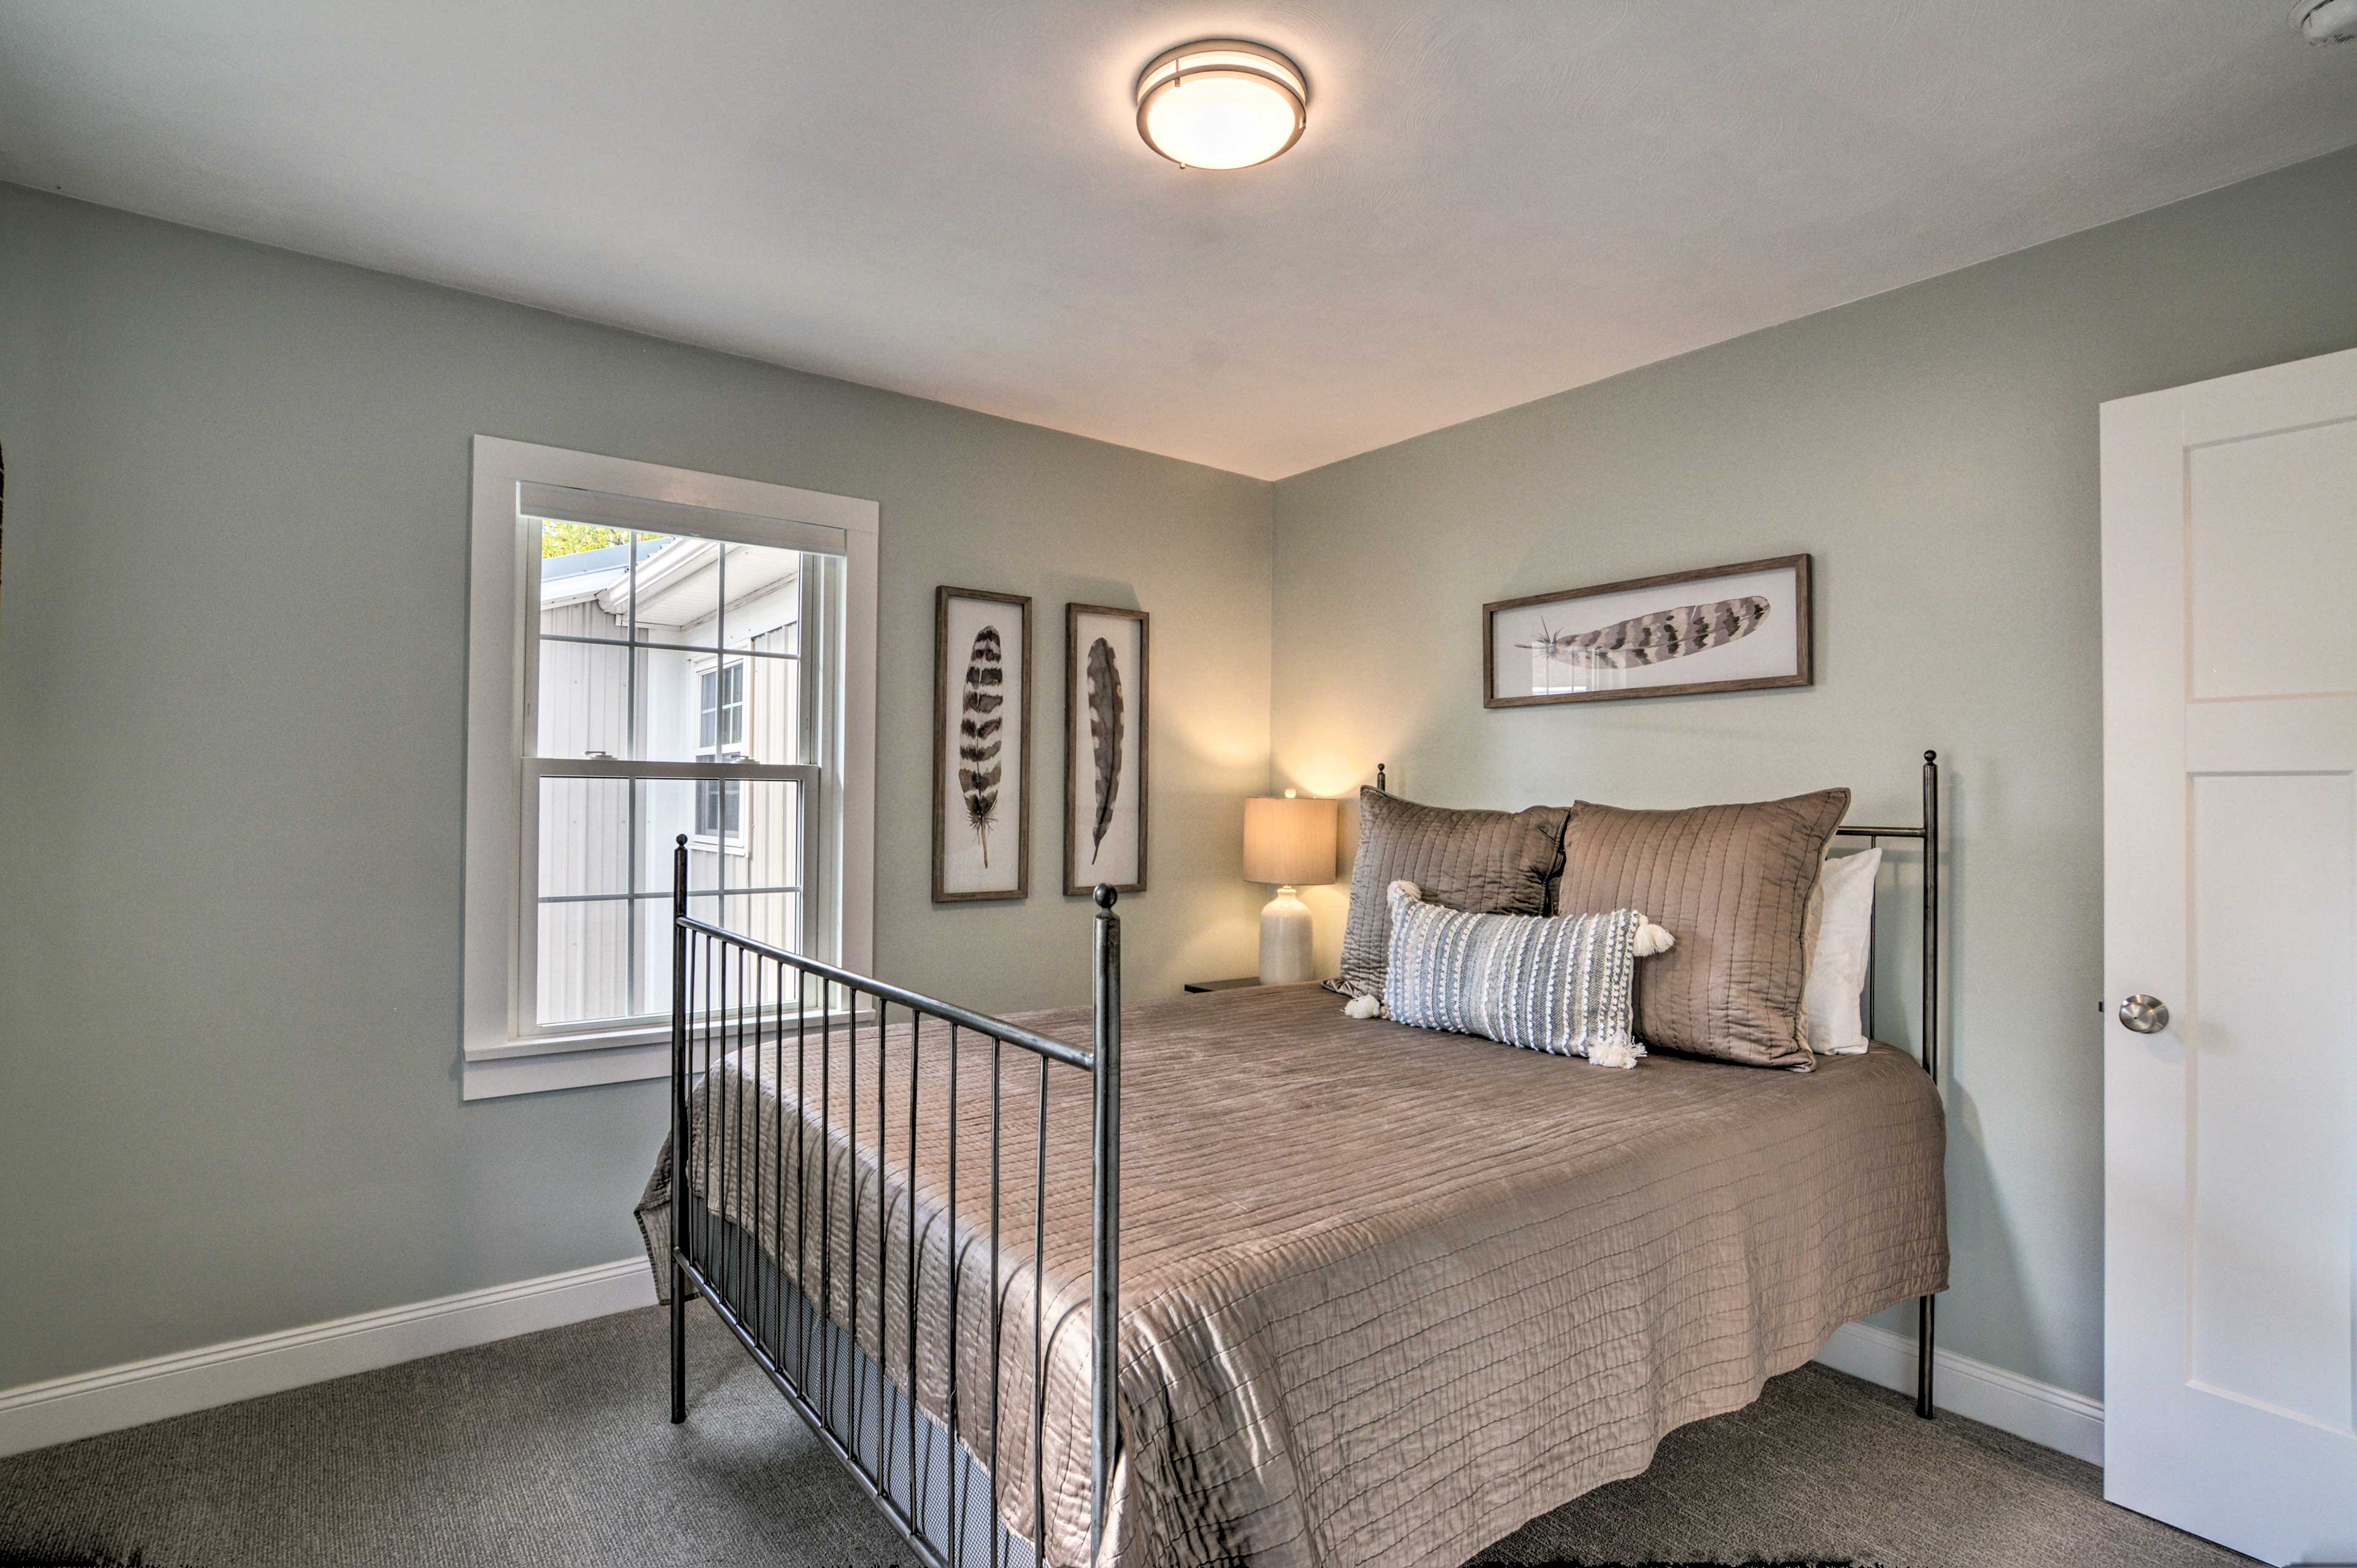 Two guests can cozy up in this queen bed!